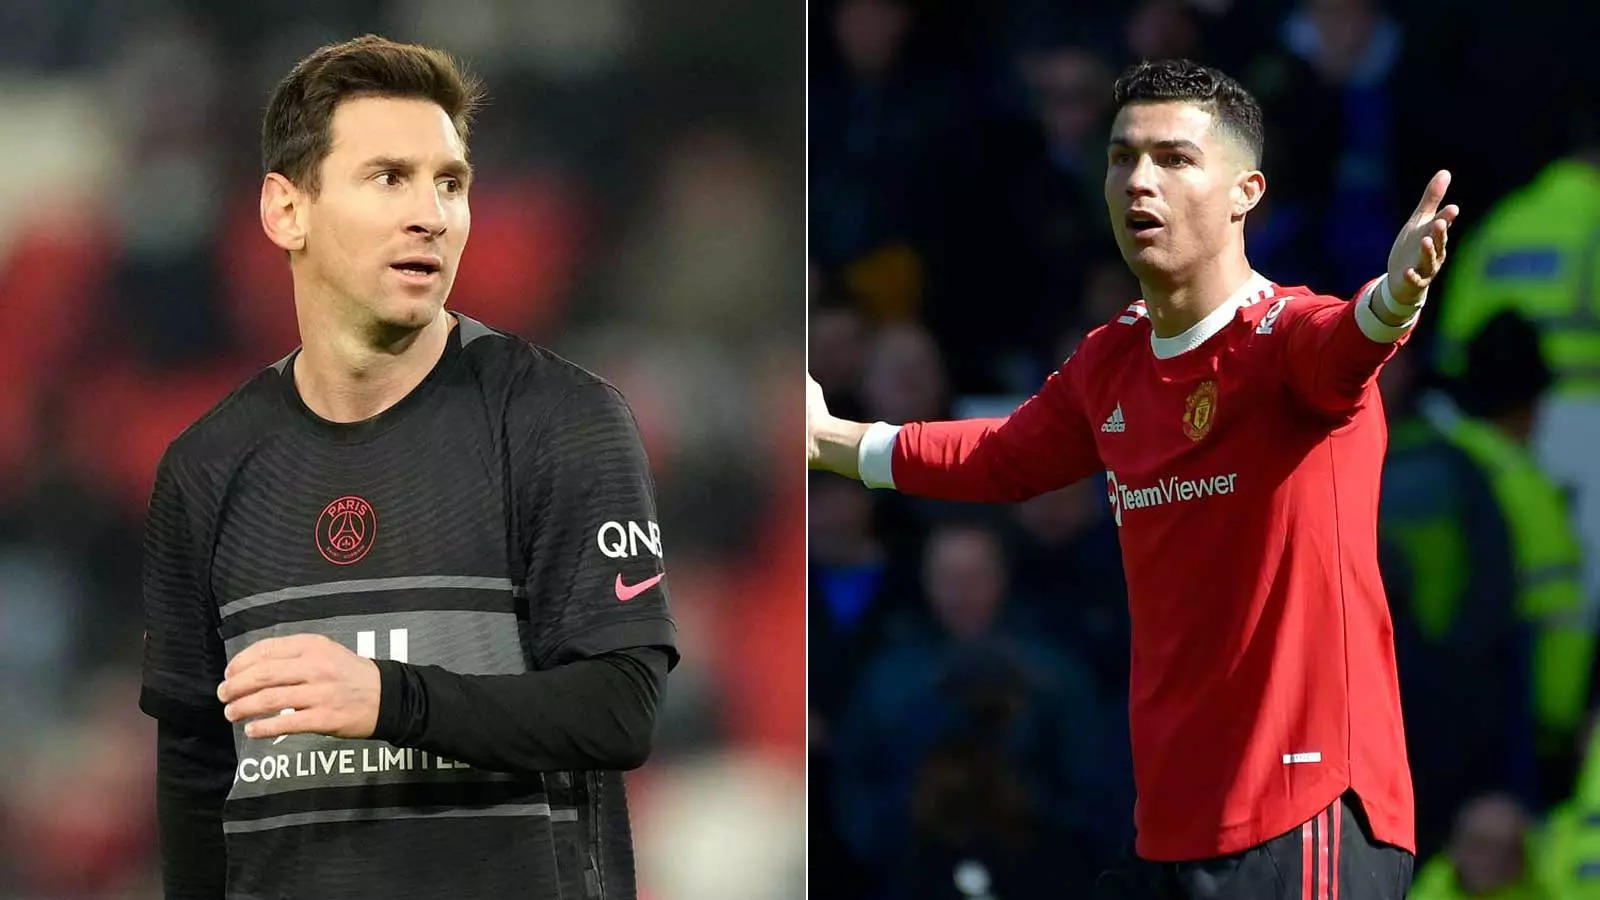 Lionel Messi has reportedly told PSG to not sign Cristiano Ronaldo